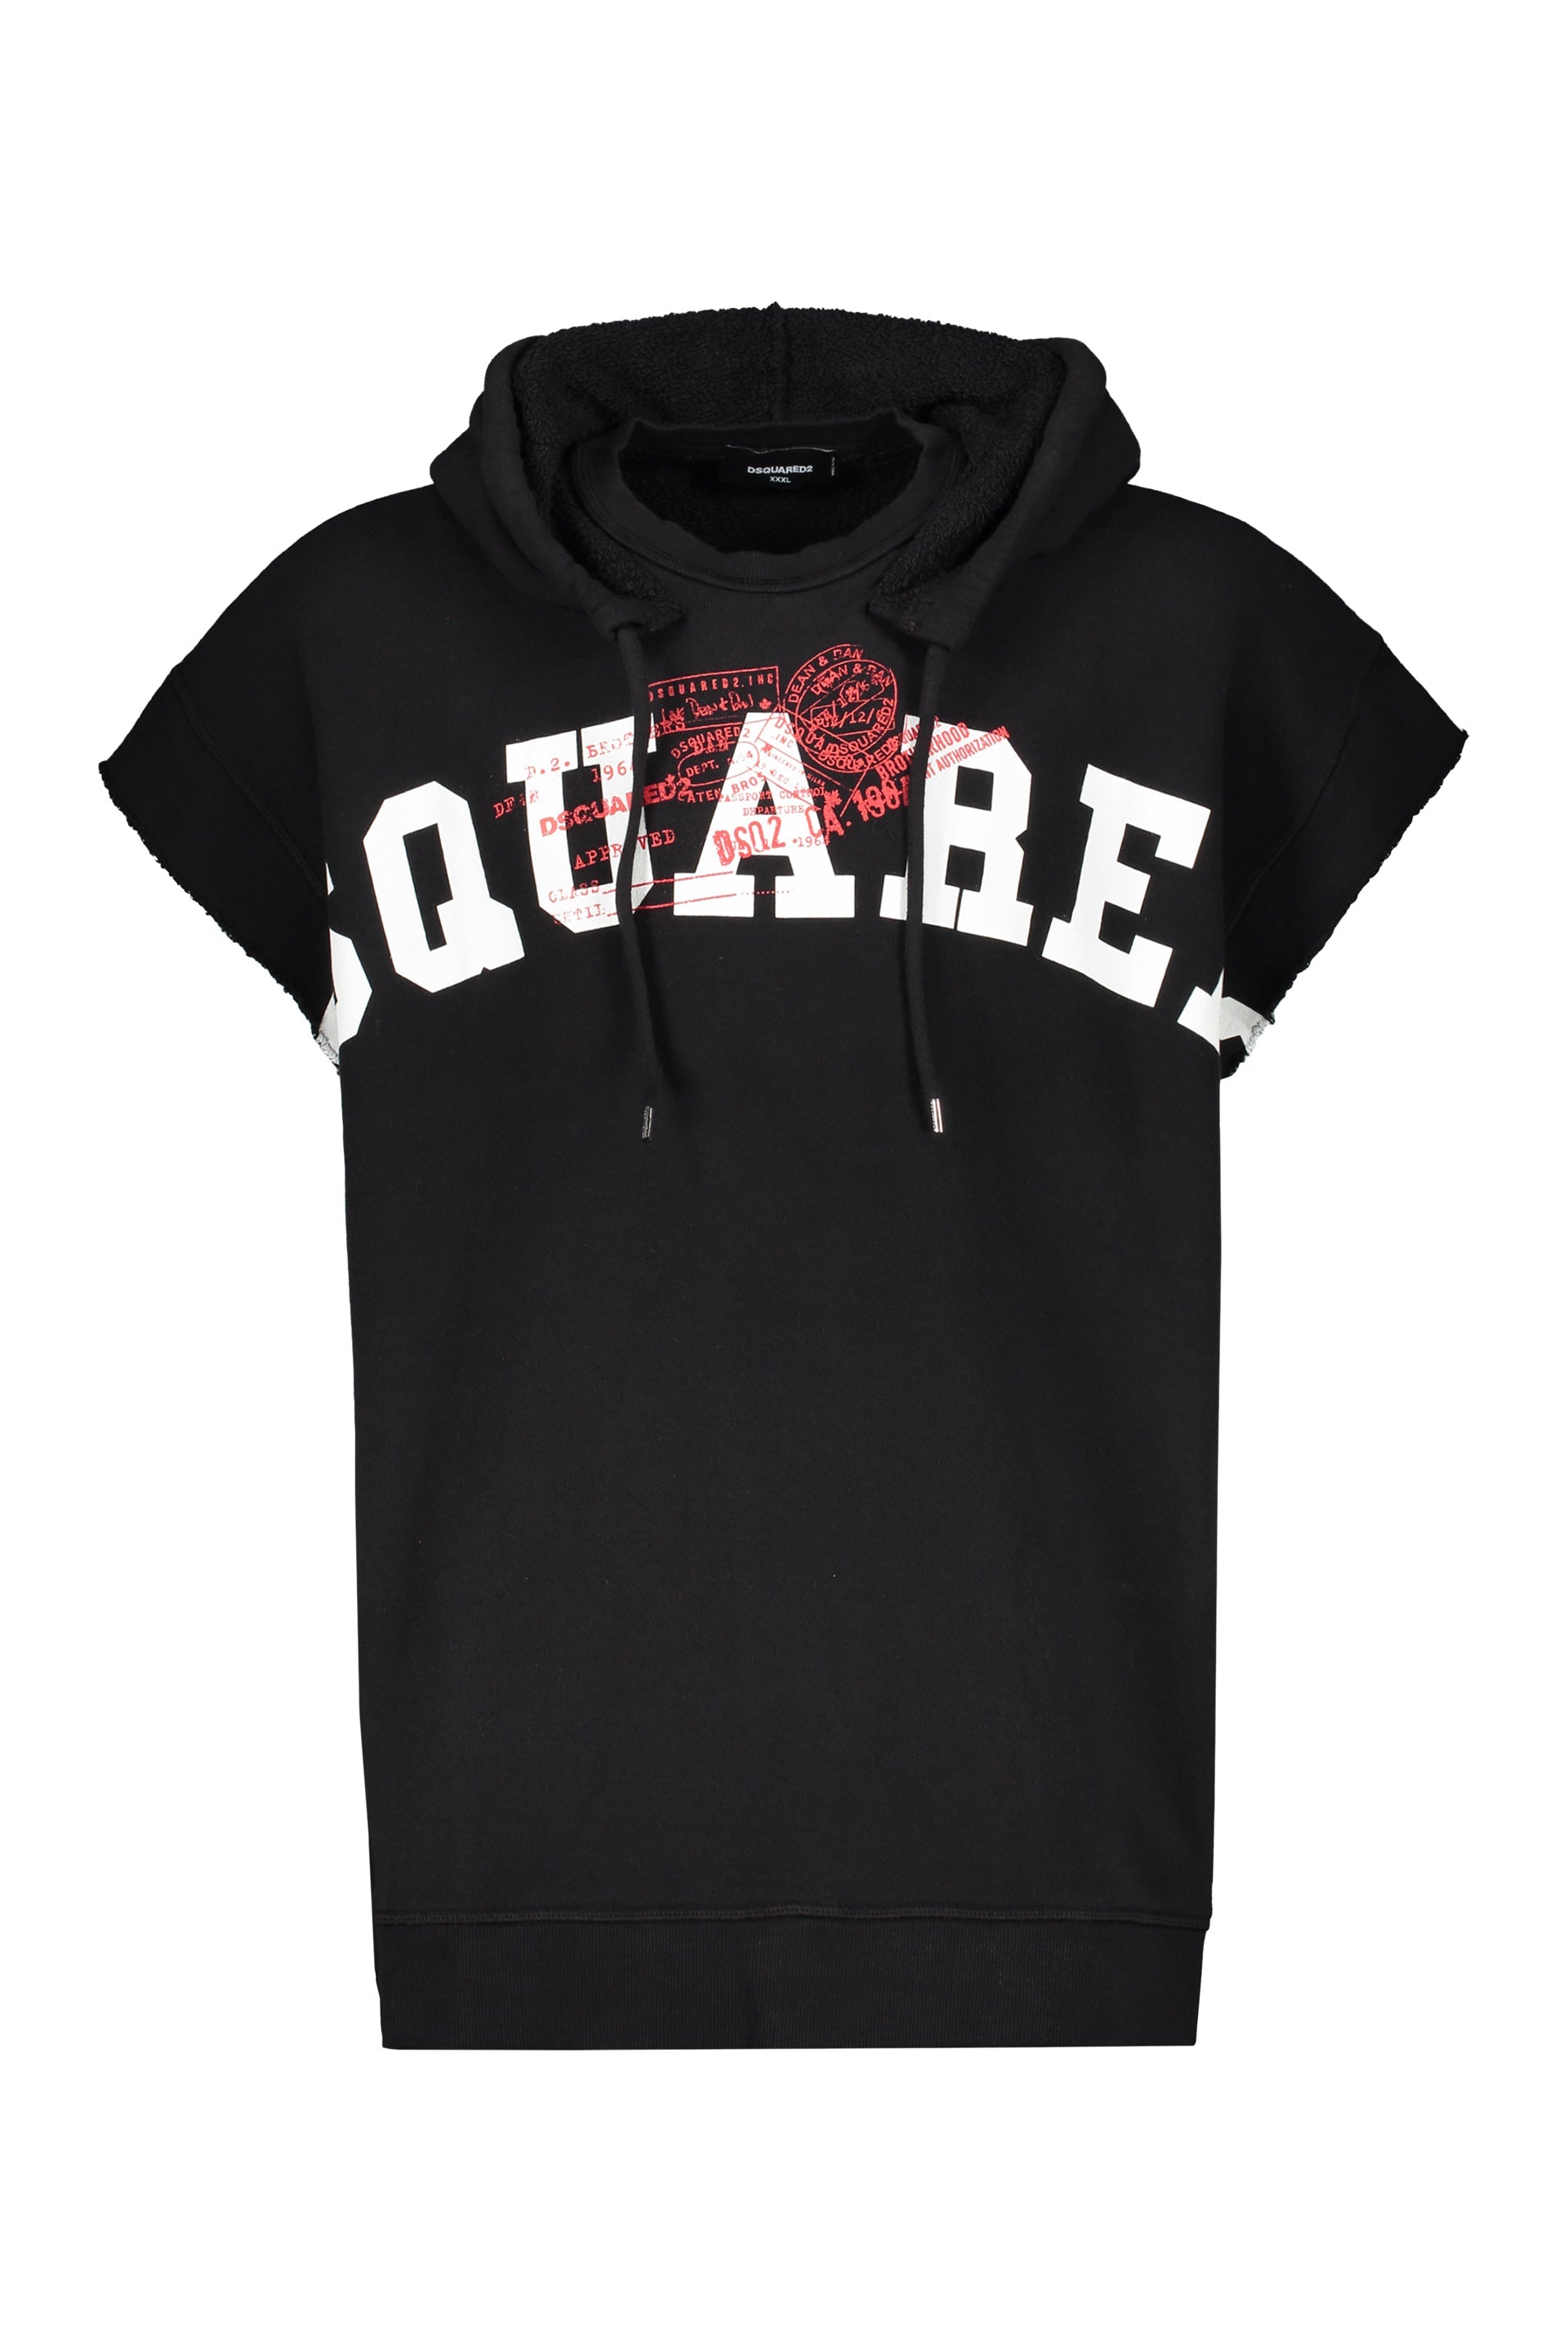 Dsquared2-OUTLET-SALE-Cotton-hoodie-Strick-L-ARCHIVE-COLLECTION_4a48bf7b-56ac-4d0c-bd70-be0def91a546.jpg